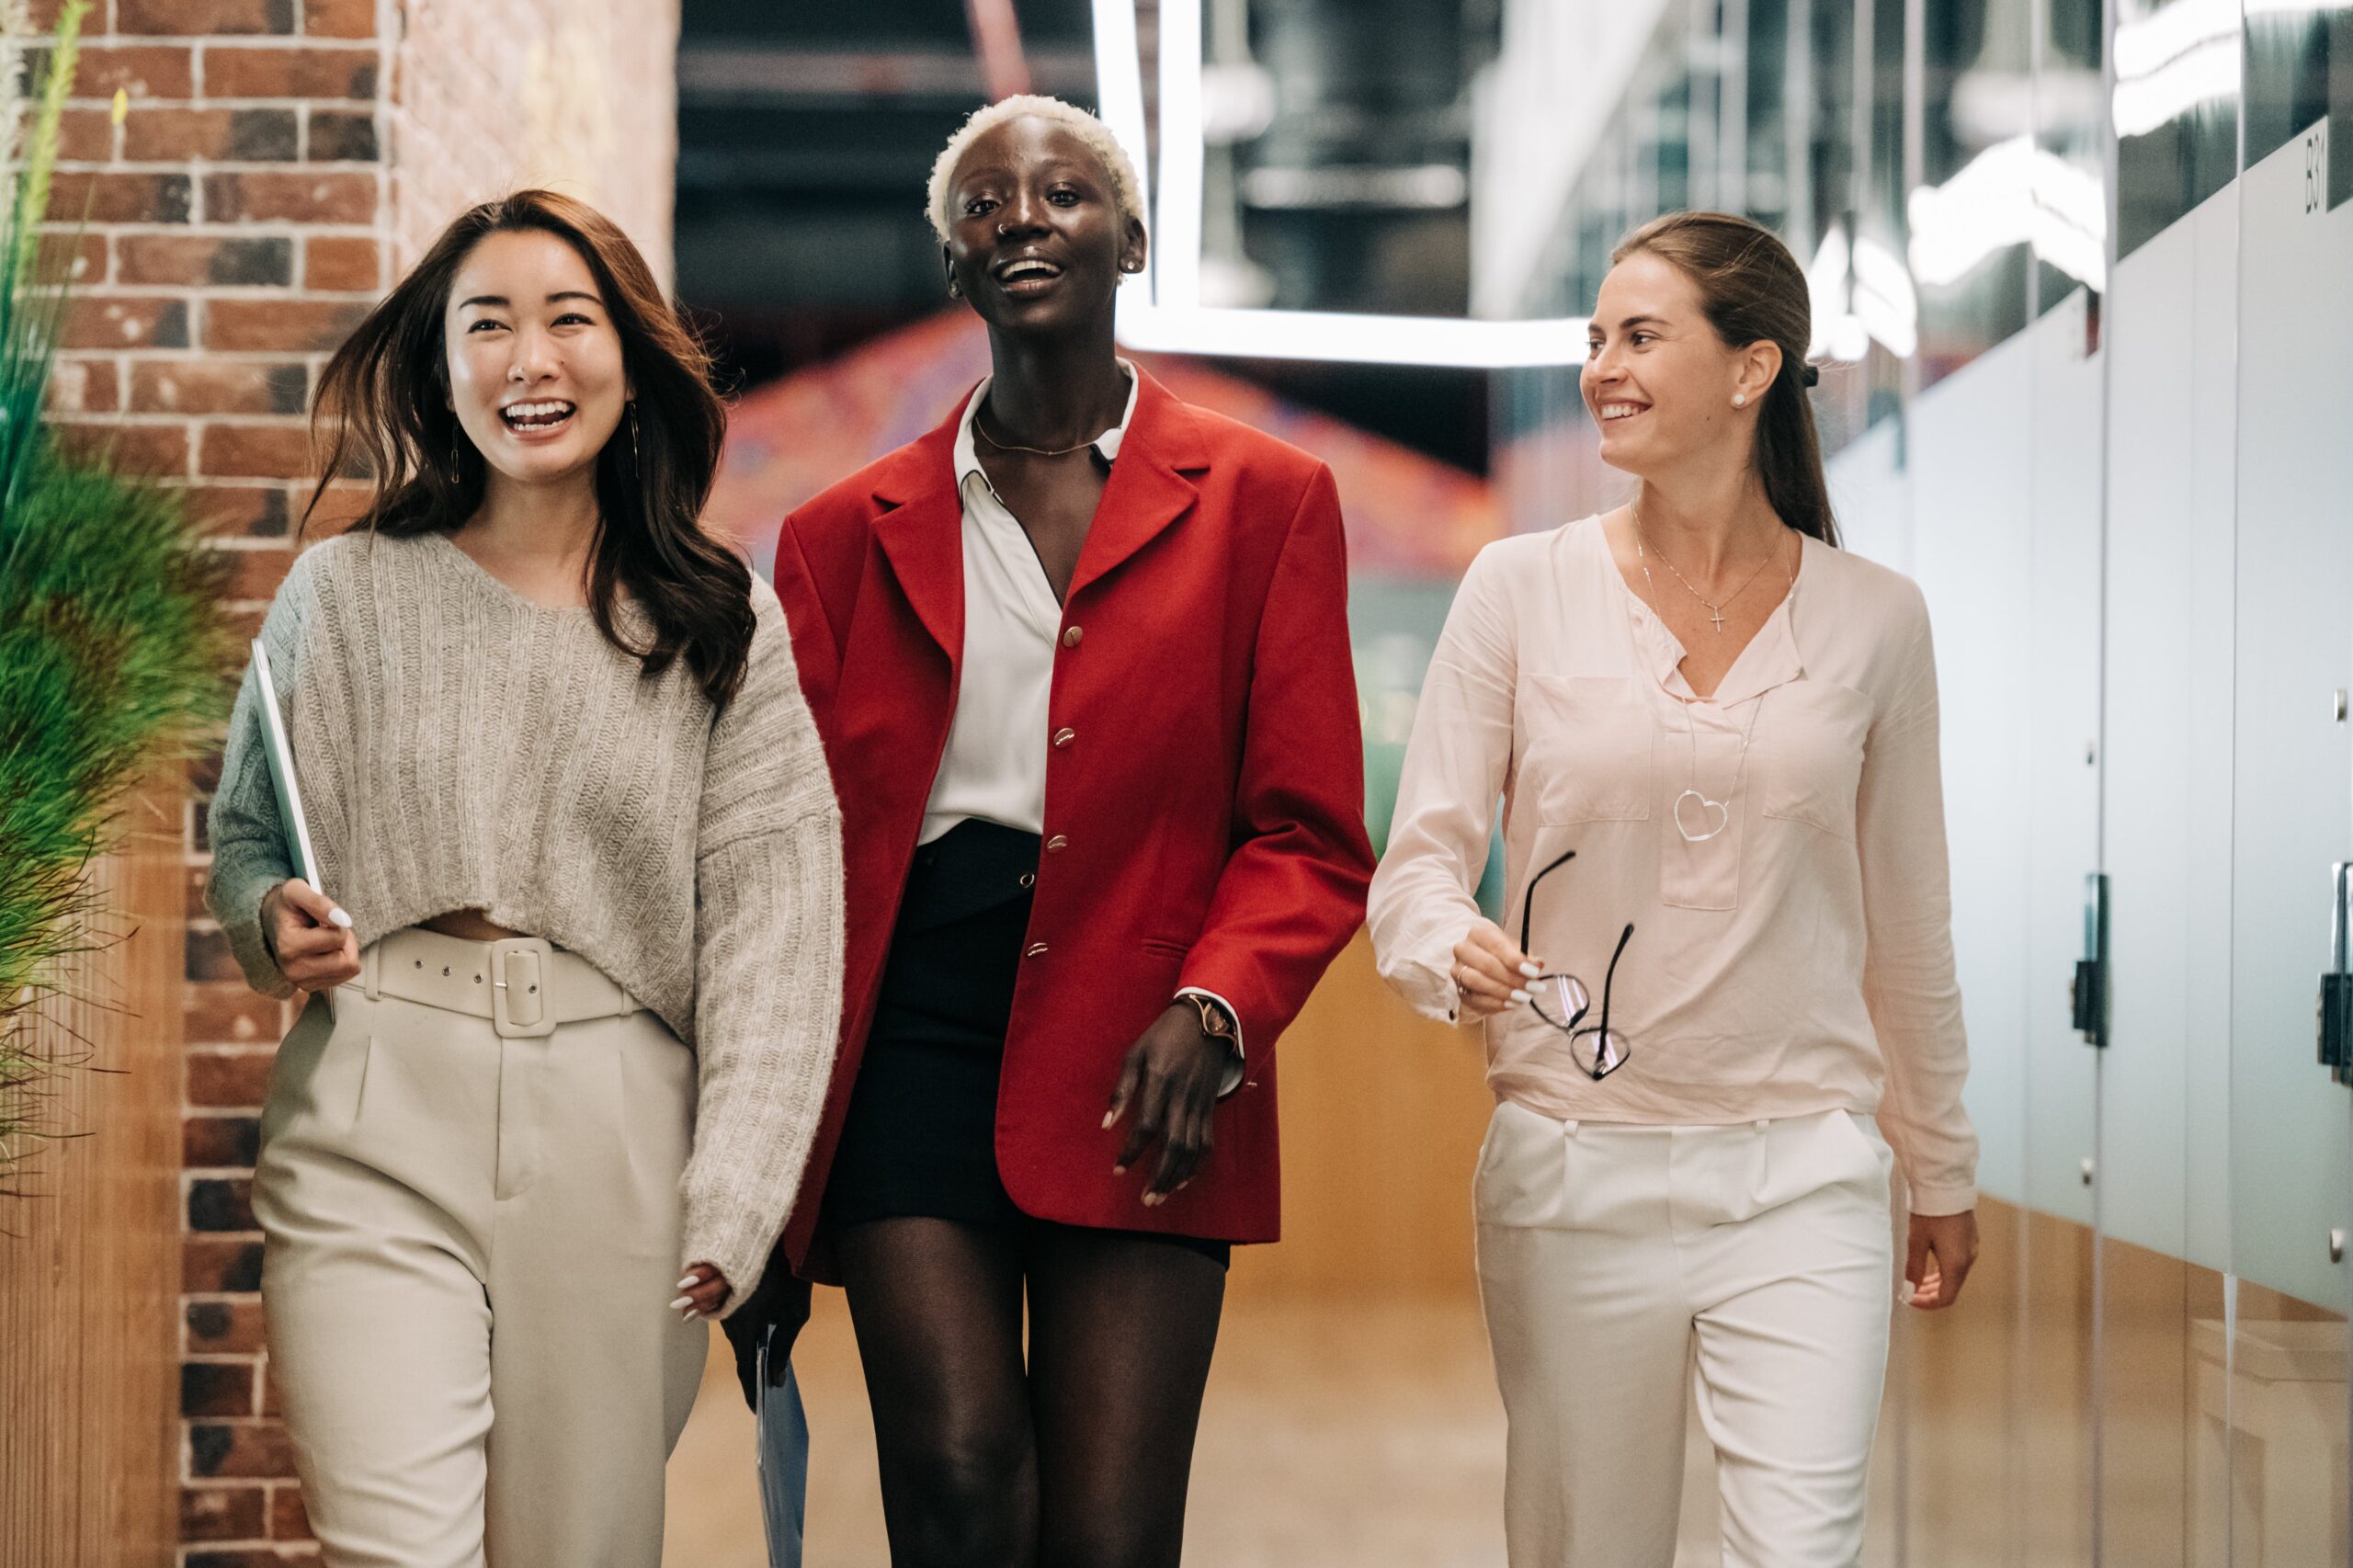 Three corporate women walking together through a modern office building